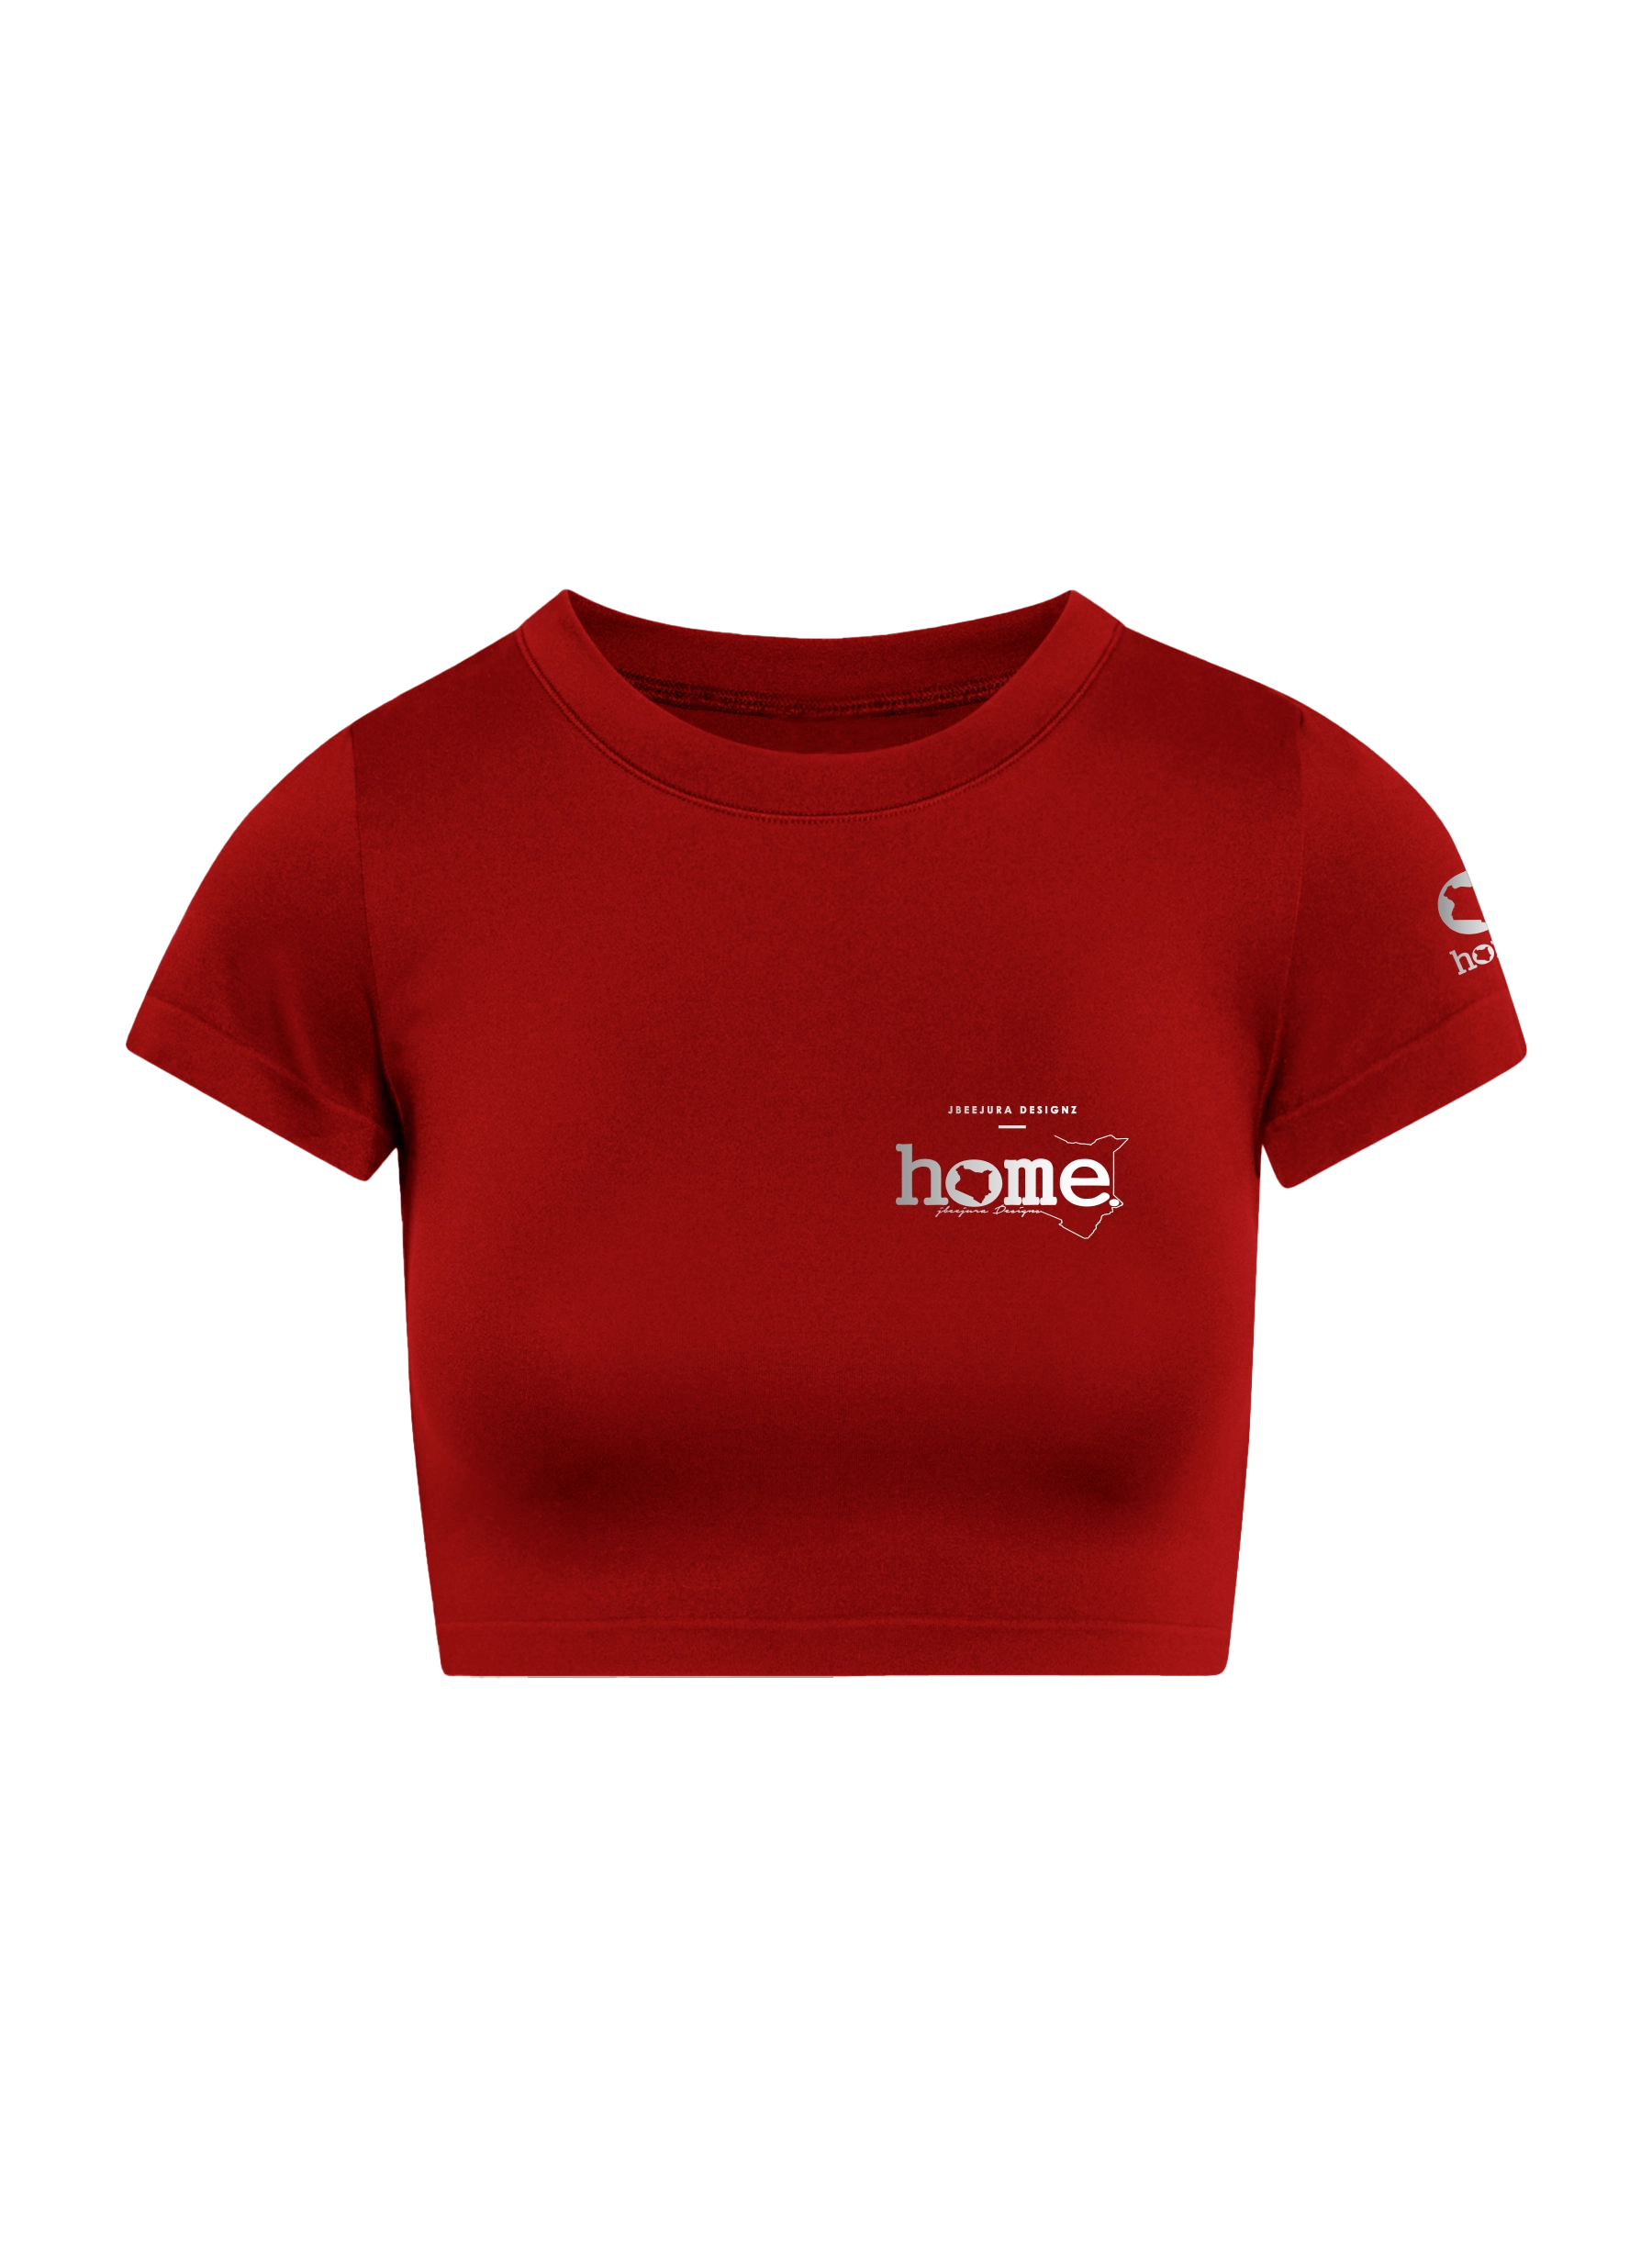 home_254 SHORT SLEEVED RED CROPPED ARIA TEE WITH A SILVER 3D WORDS PRINT 